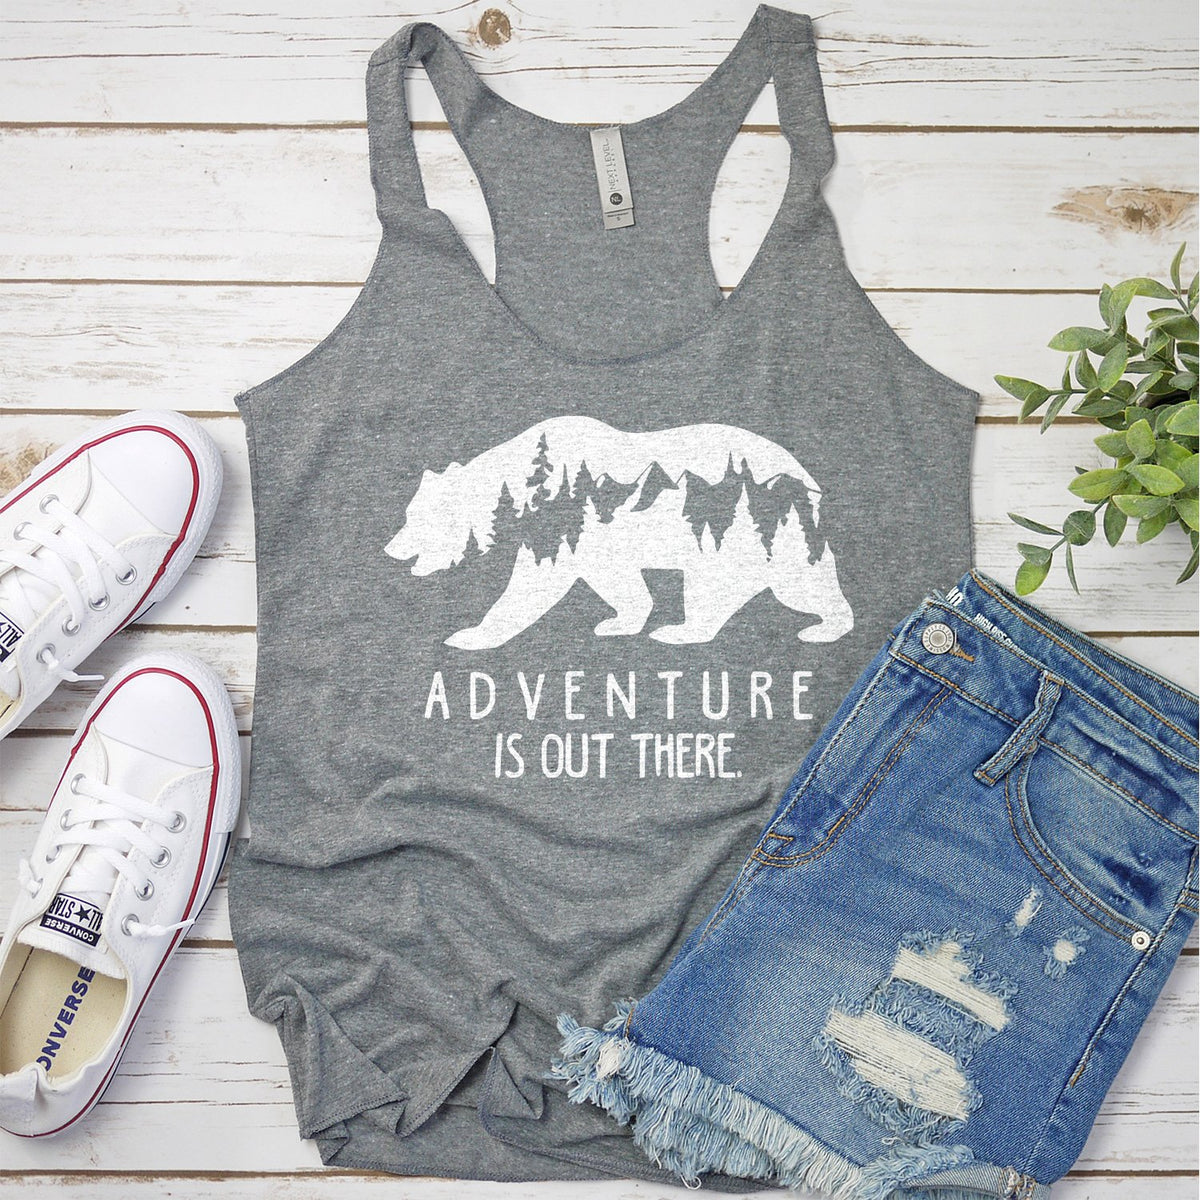 Adventure is Out There - Tank Top Racerback